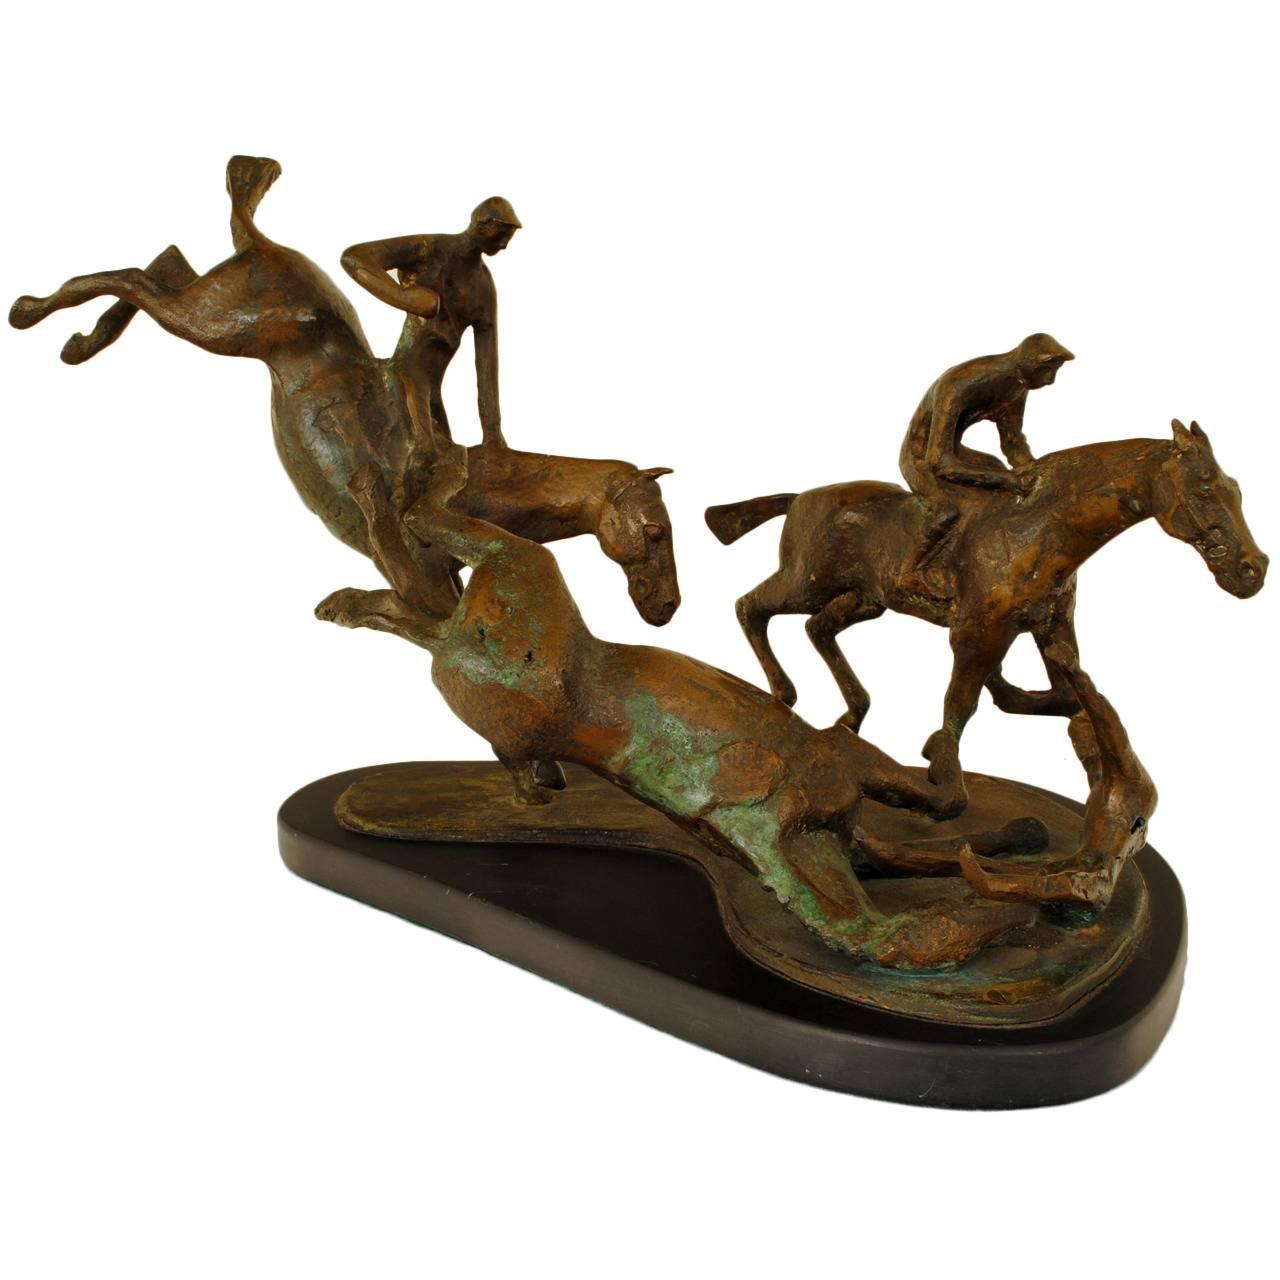 Mid-20th Century Figural Bronze Group on Marble Base, "Steeplechase" Unsigned